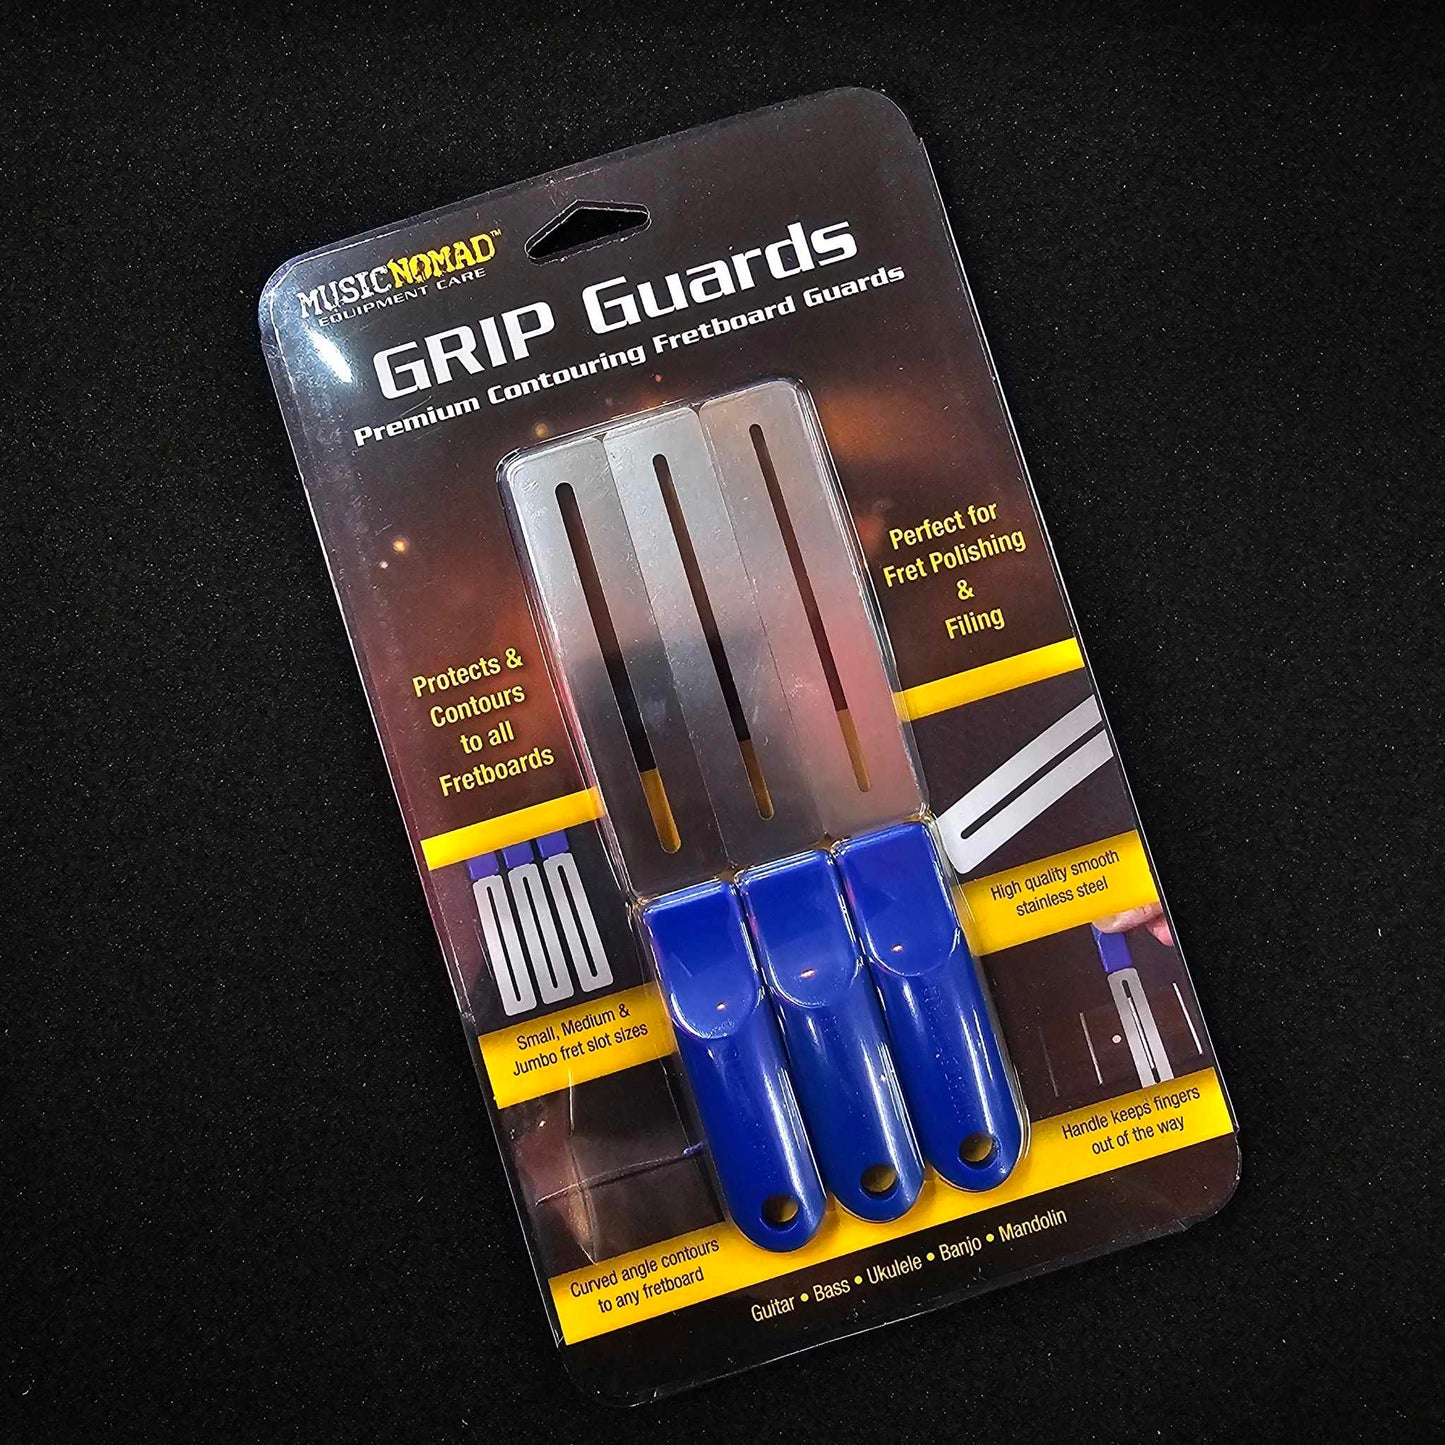 Music Nomad Grip Guards